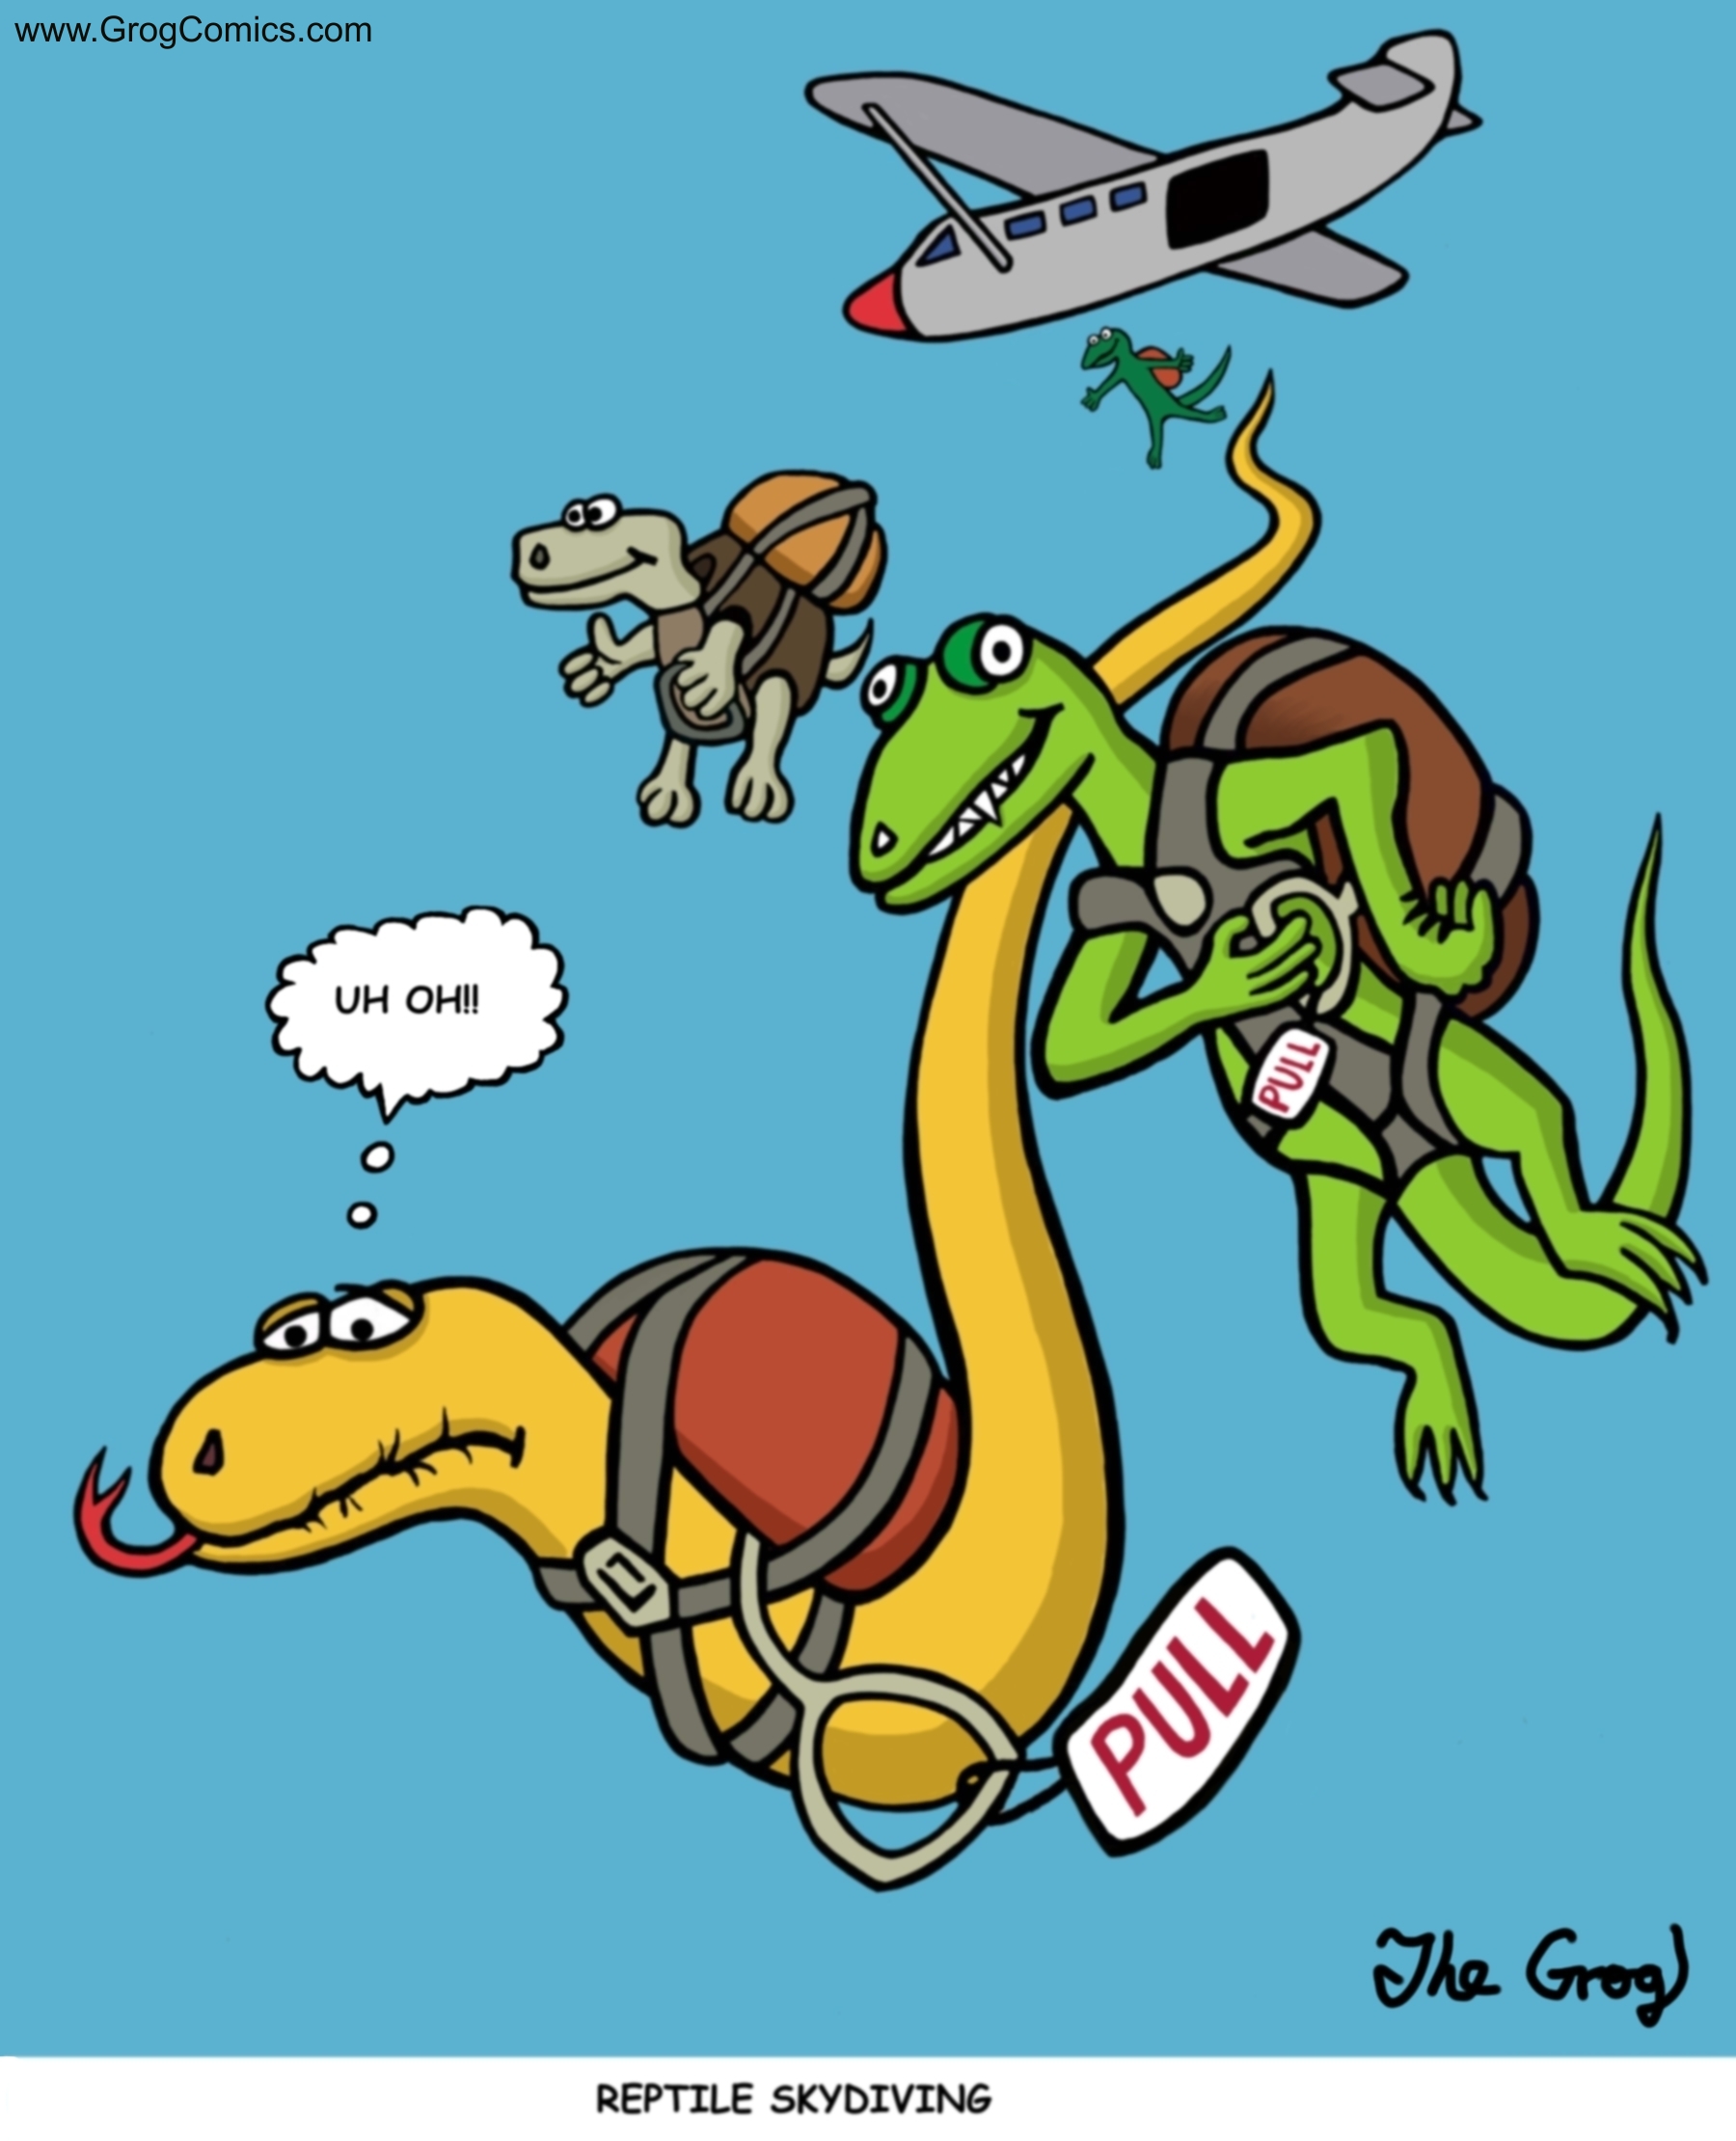 A group of reptiles goes skydiving. The lizards and tortoise are having loads of fun. But the snake, as he plummets towards earth, realizes something...he doesn’t have hands to pull the ripcord. He says to himself, “Uh oh”.